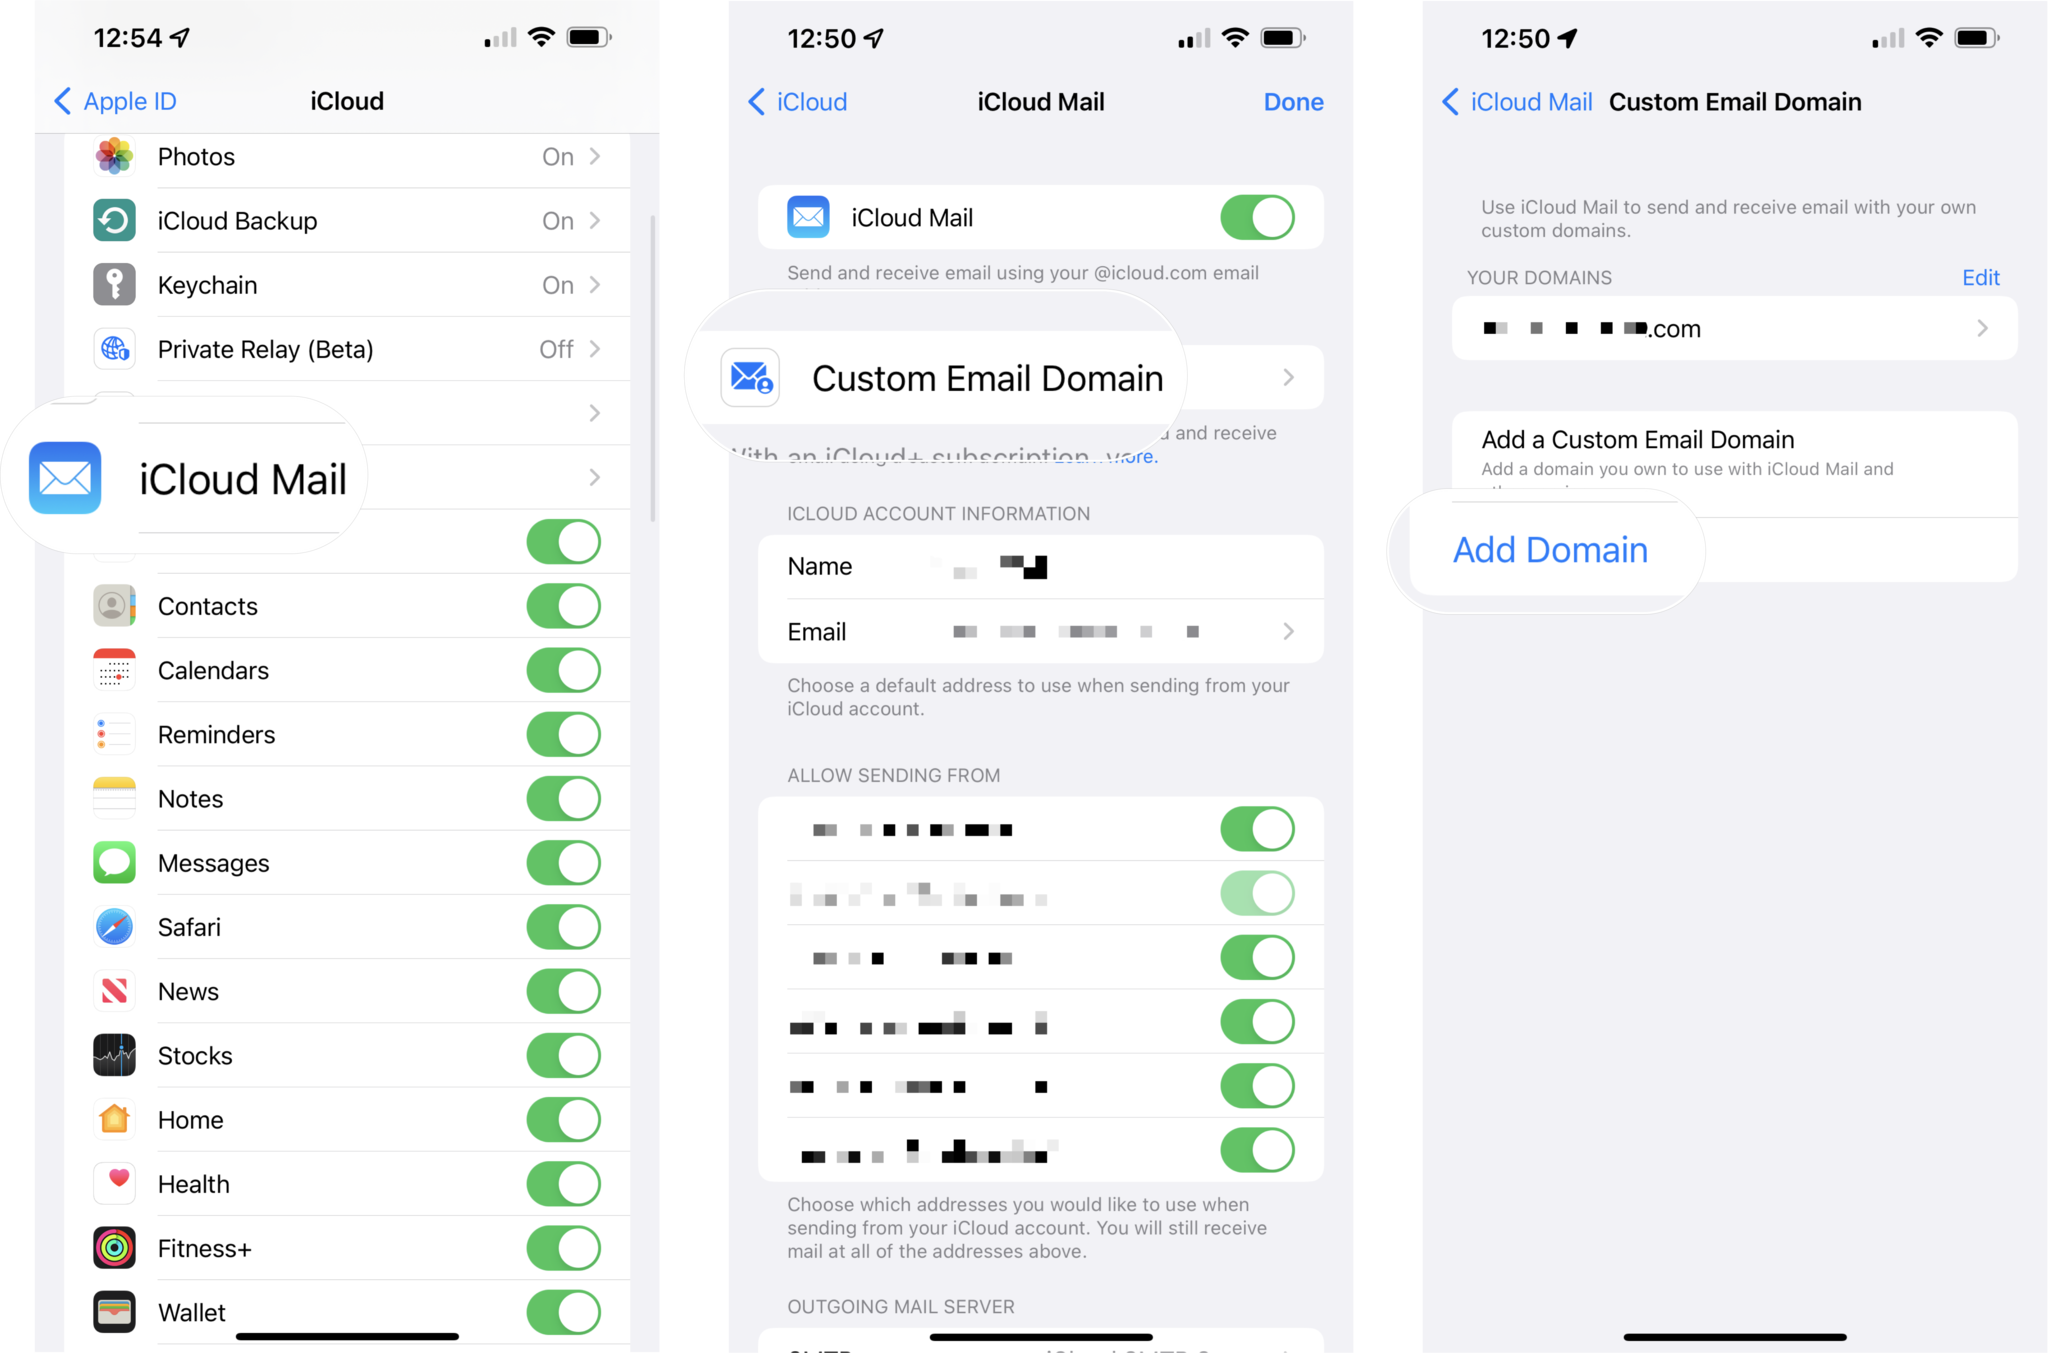 Add a custom email domain for iCloud Mail on iOS: Tap iCloud Mail, tap Custom Email Domain, tap Add Domain and fill out your domain details.